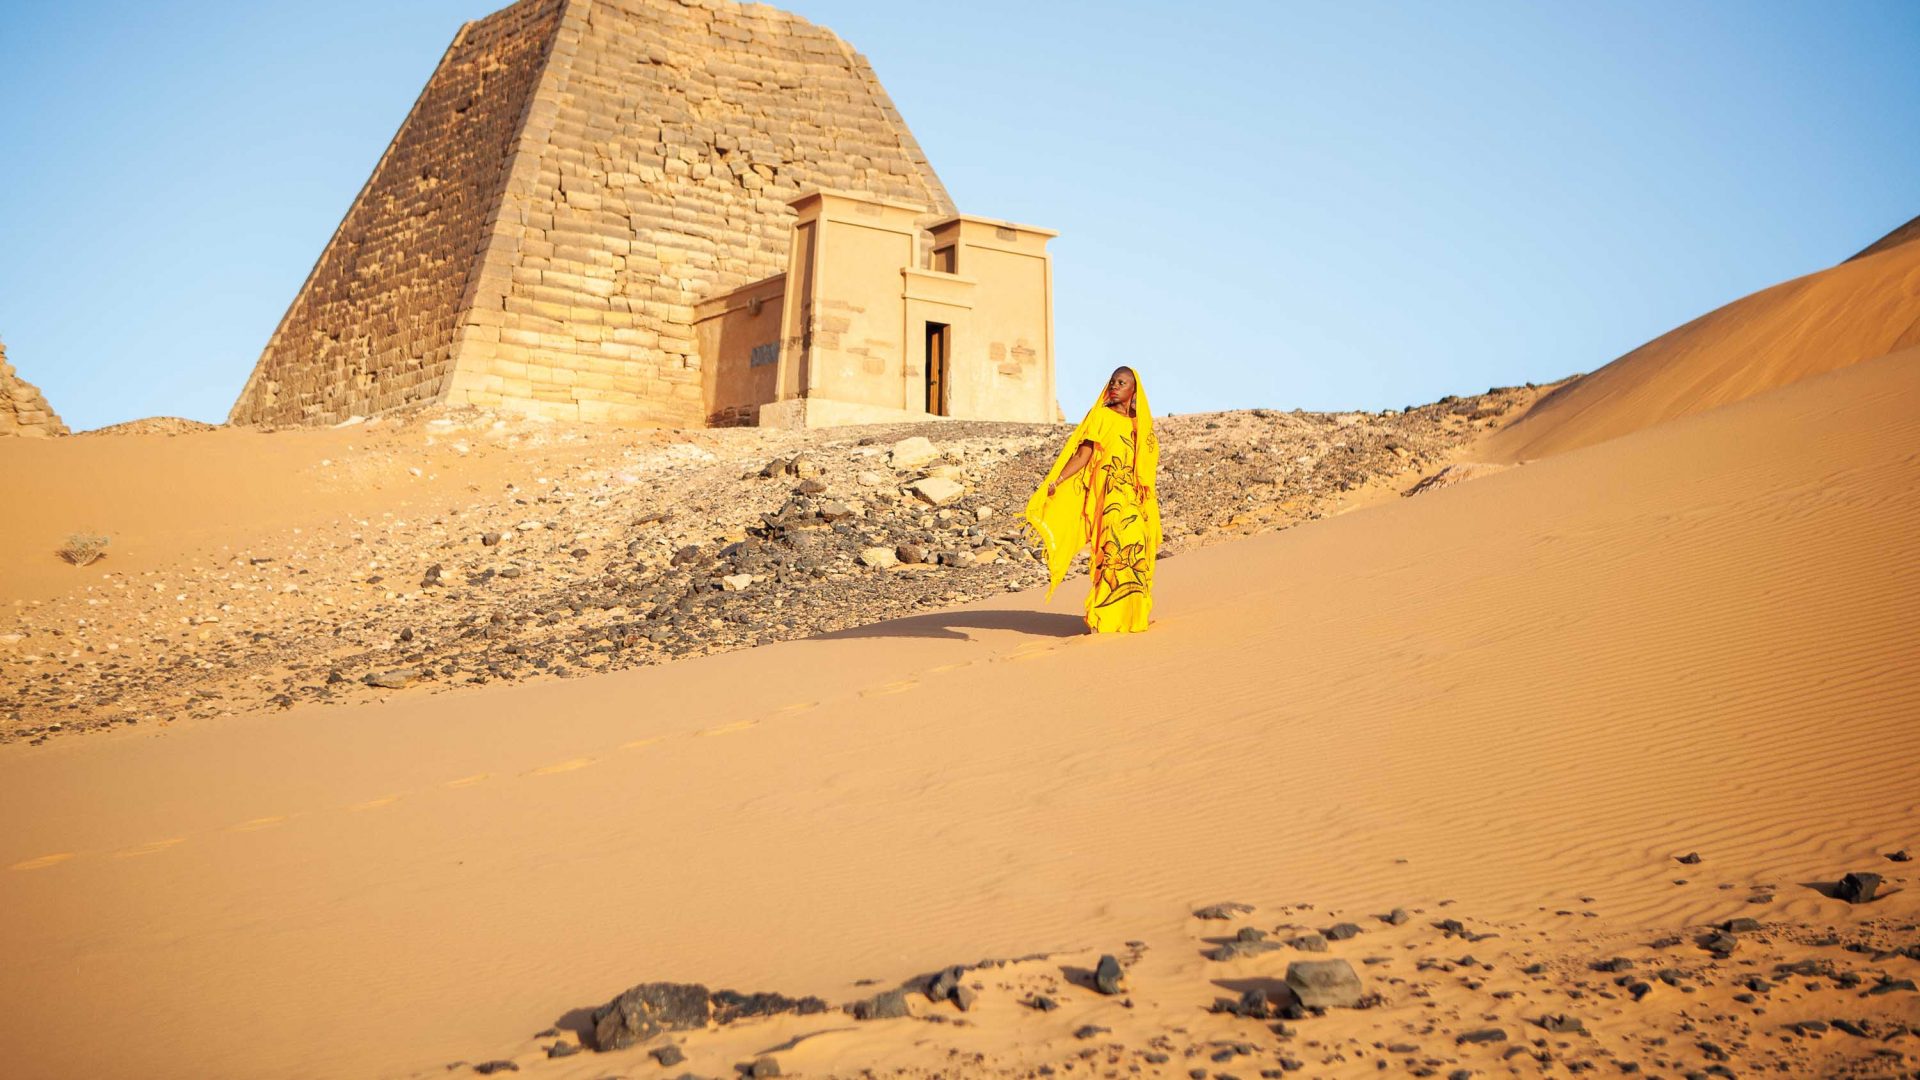 Jessica wears all yellow and stands in the desert sand with a stone structure behind her.